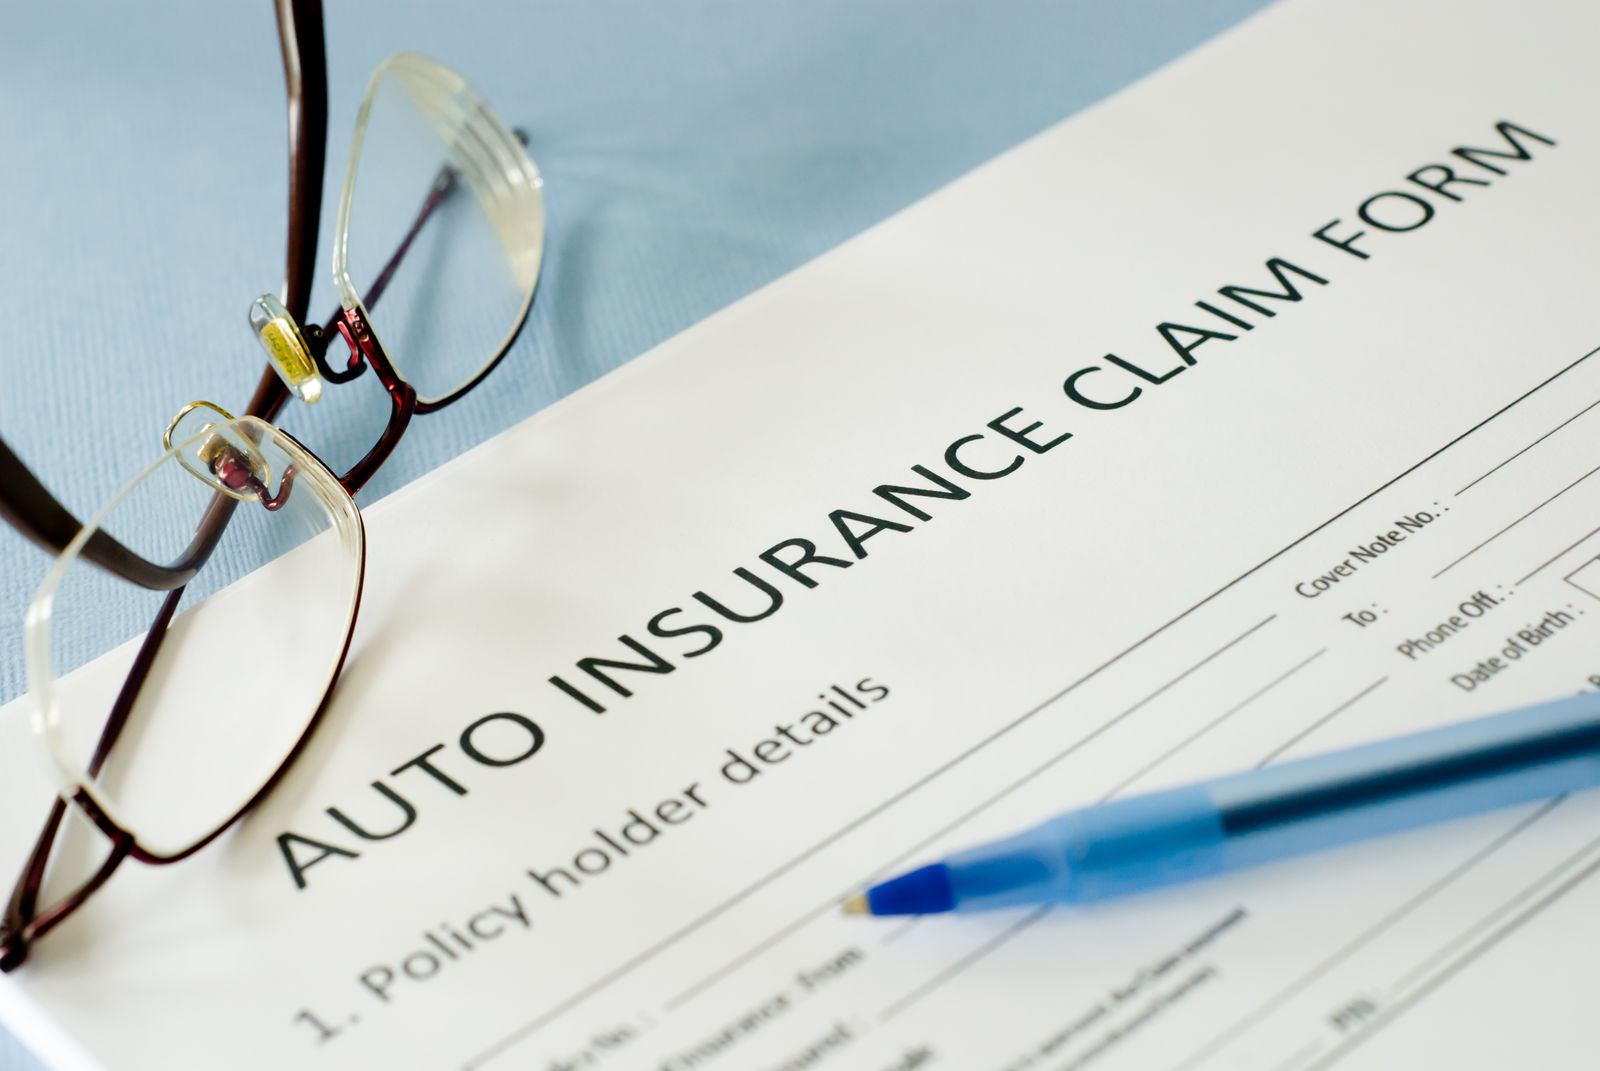 How much does insurance cover in an accident?